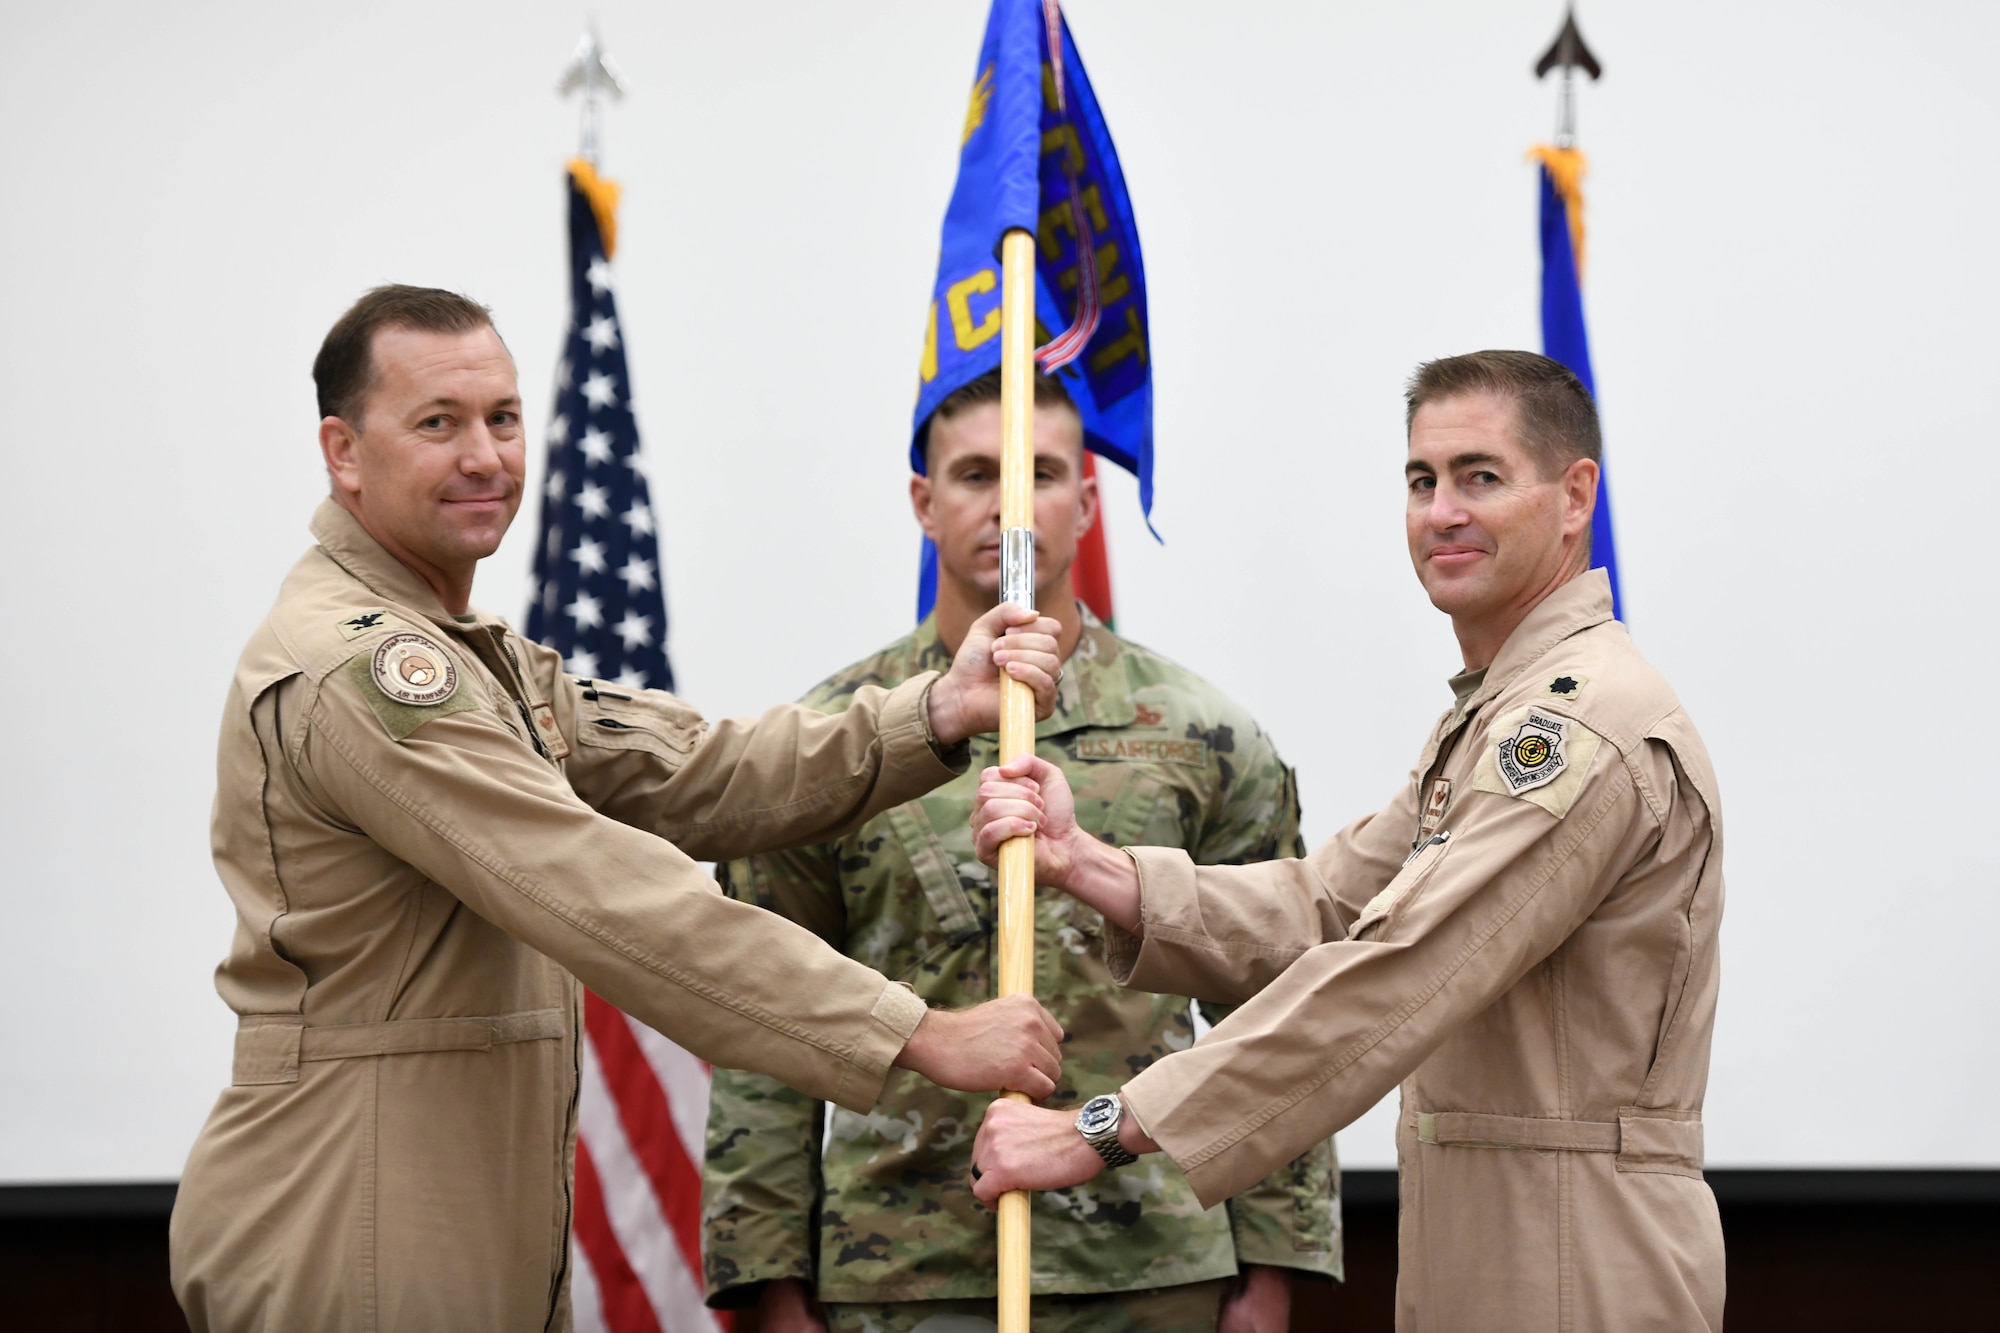 The Ninth Air Force (Air Forces Central) Air Warfare Center held a change of command ceremony July 15, 2022, at Erth Hotel, Abu Dhabi, United Arab Emirates. Col. Jordan G. Grant, the previous commander of AFCENT AWC passed the guidon to Lt. Col Kevin Walsh.